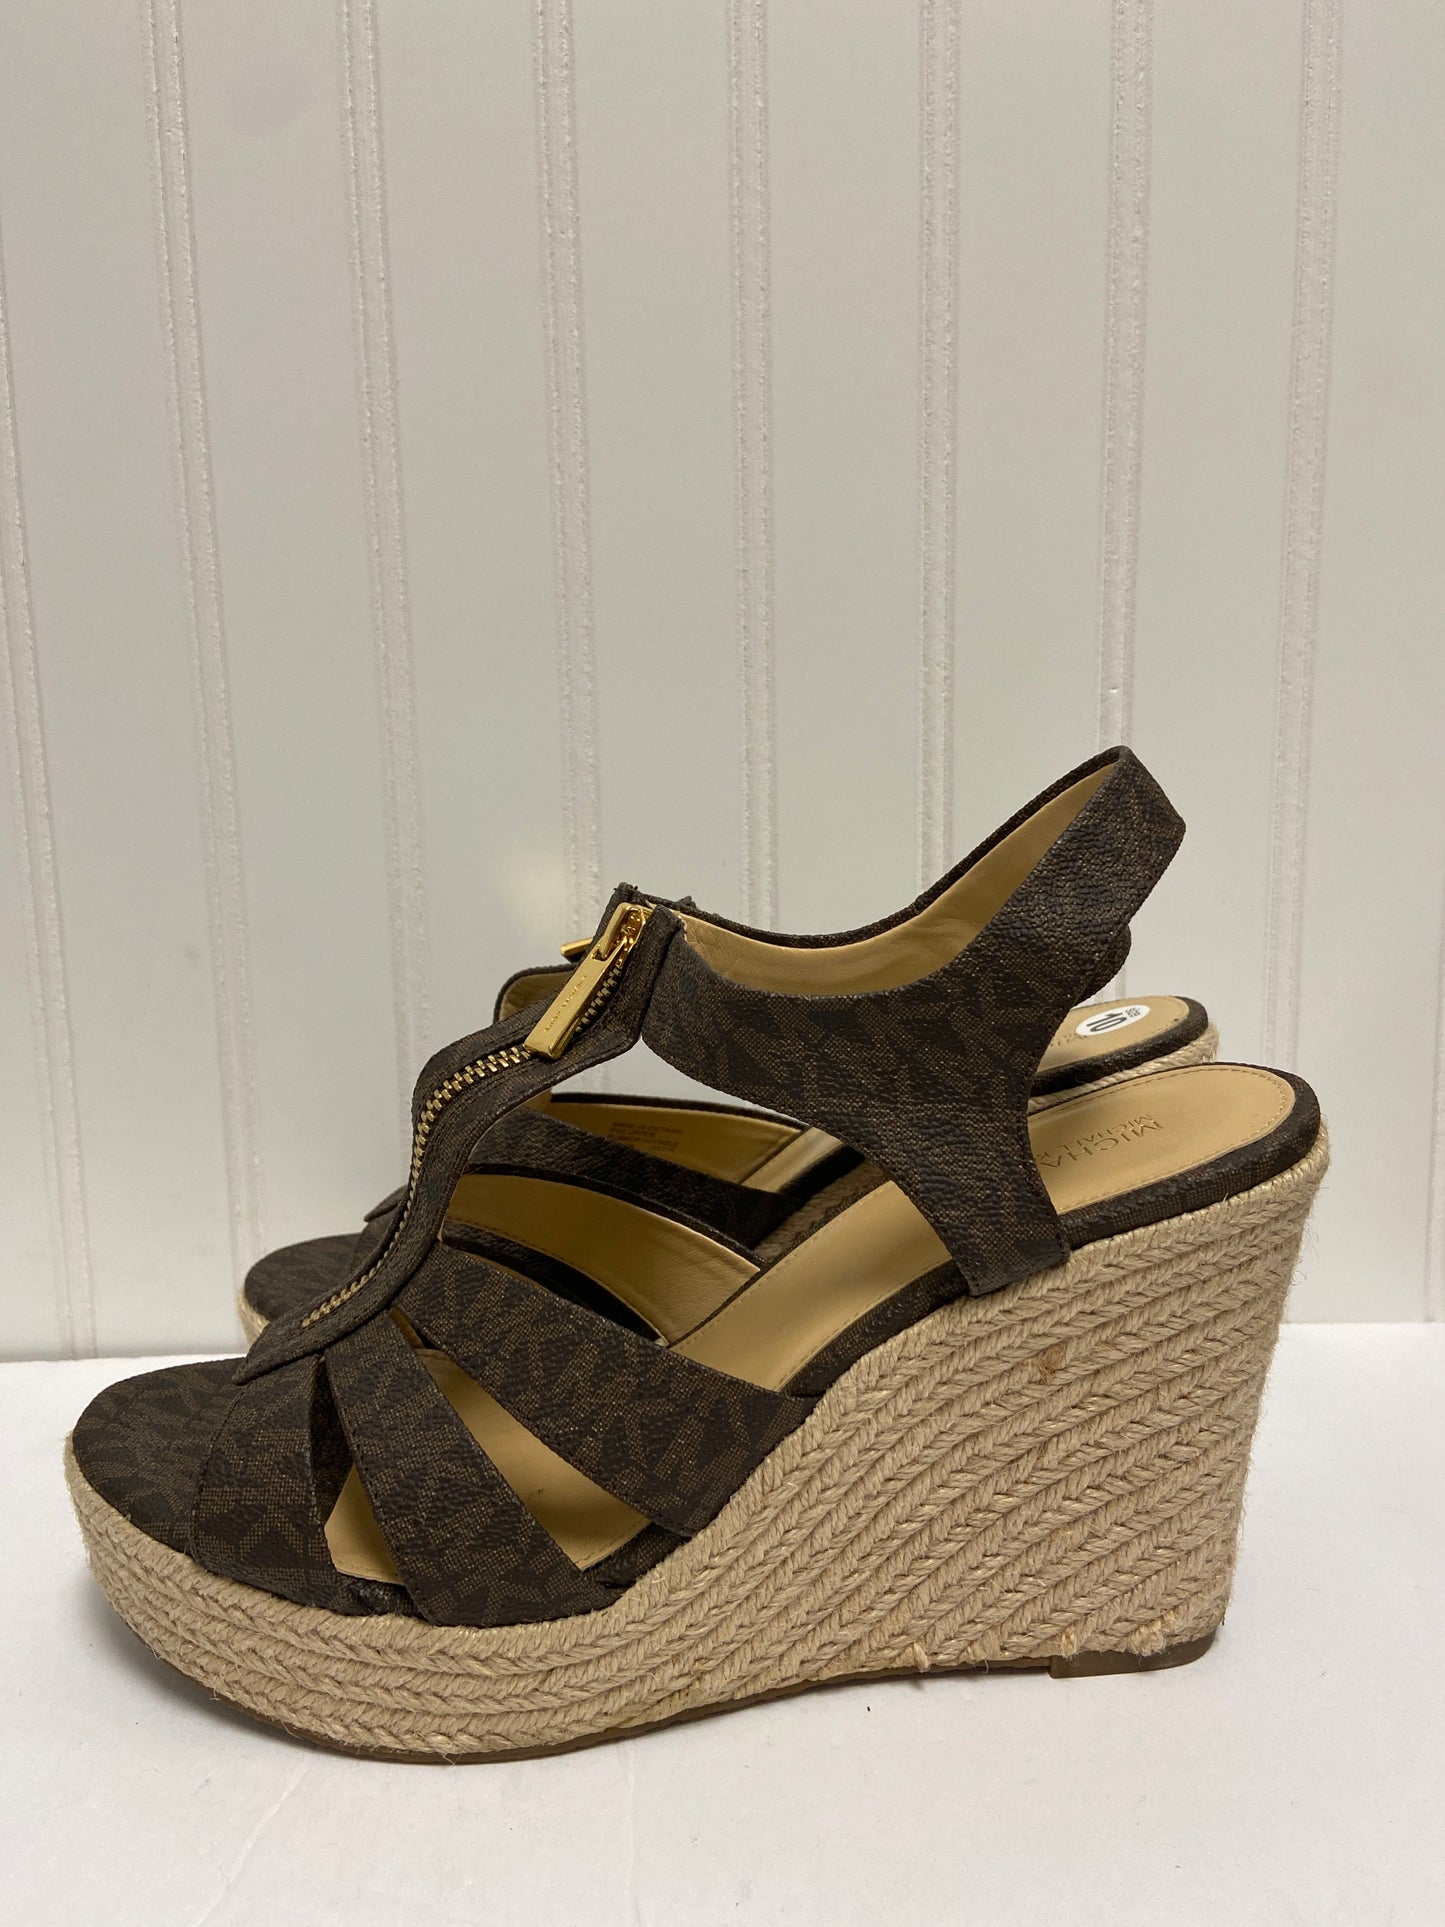 Sandals Heels Wedge By Michael By Michael Kors  Size: 10